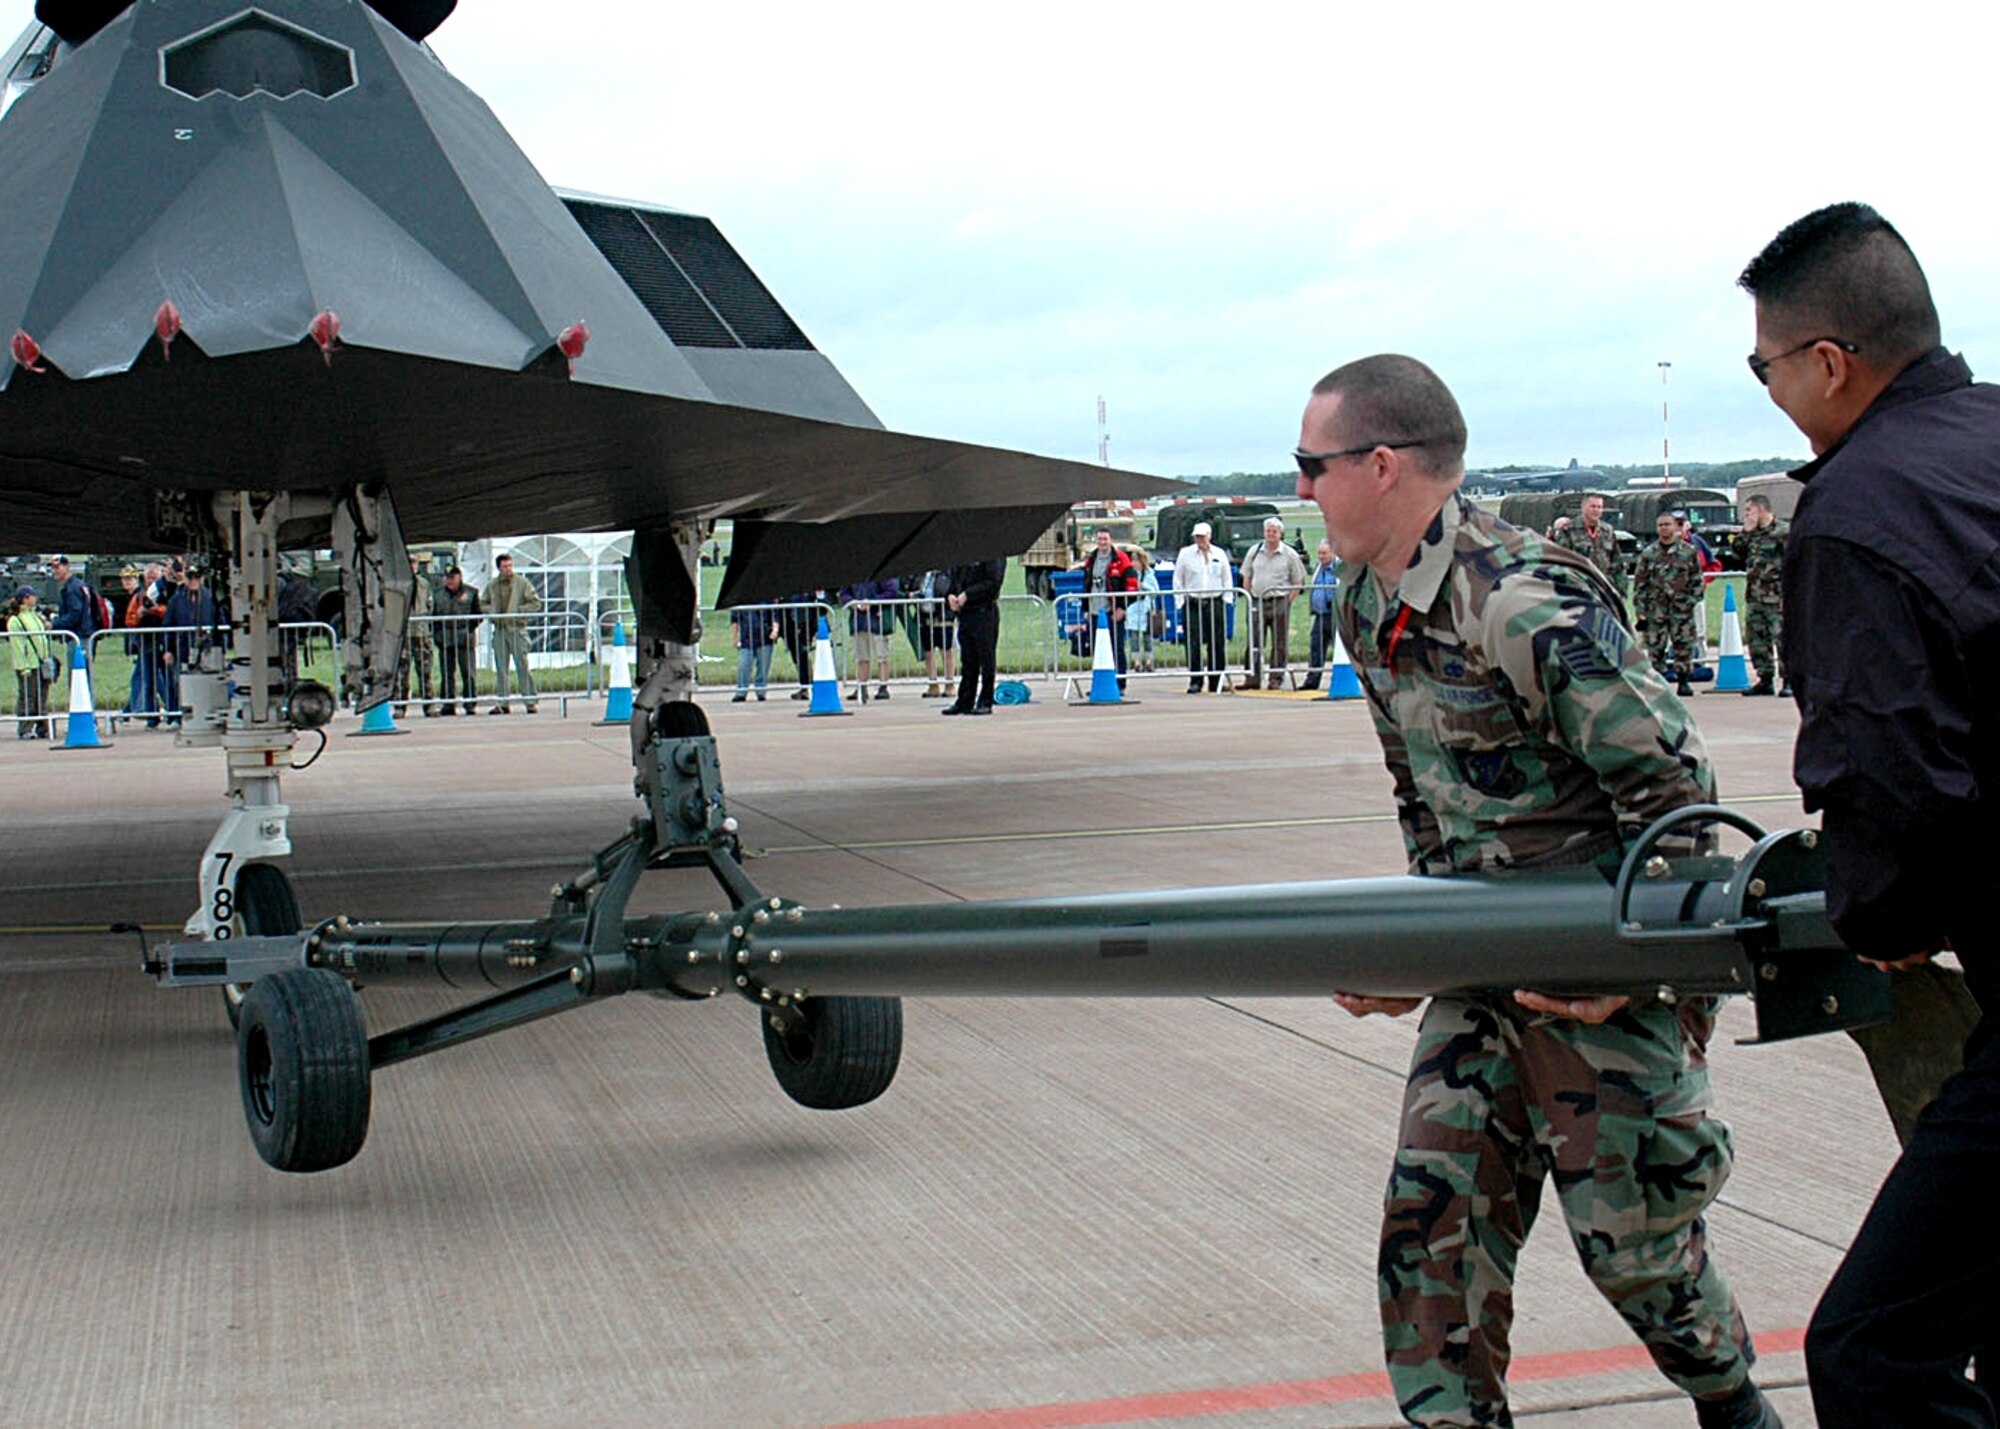 Staff Sgt. John Hopkins, 49th Maintenance Squadron, assists F-117 Demo Team member Staff Sgt. Santos Montalvo to disconnect the tow boom from an F-117A during set up of a static display for an international air show at Fairford, United Kingdom on July 14. (U.S. Air Force photo/ Mr. Tommy Fuller)